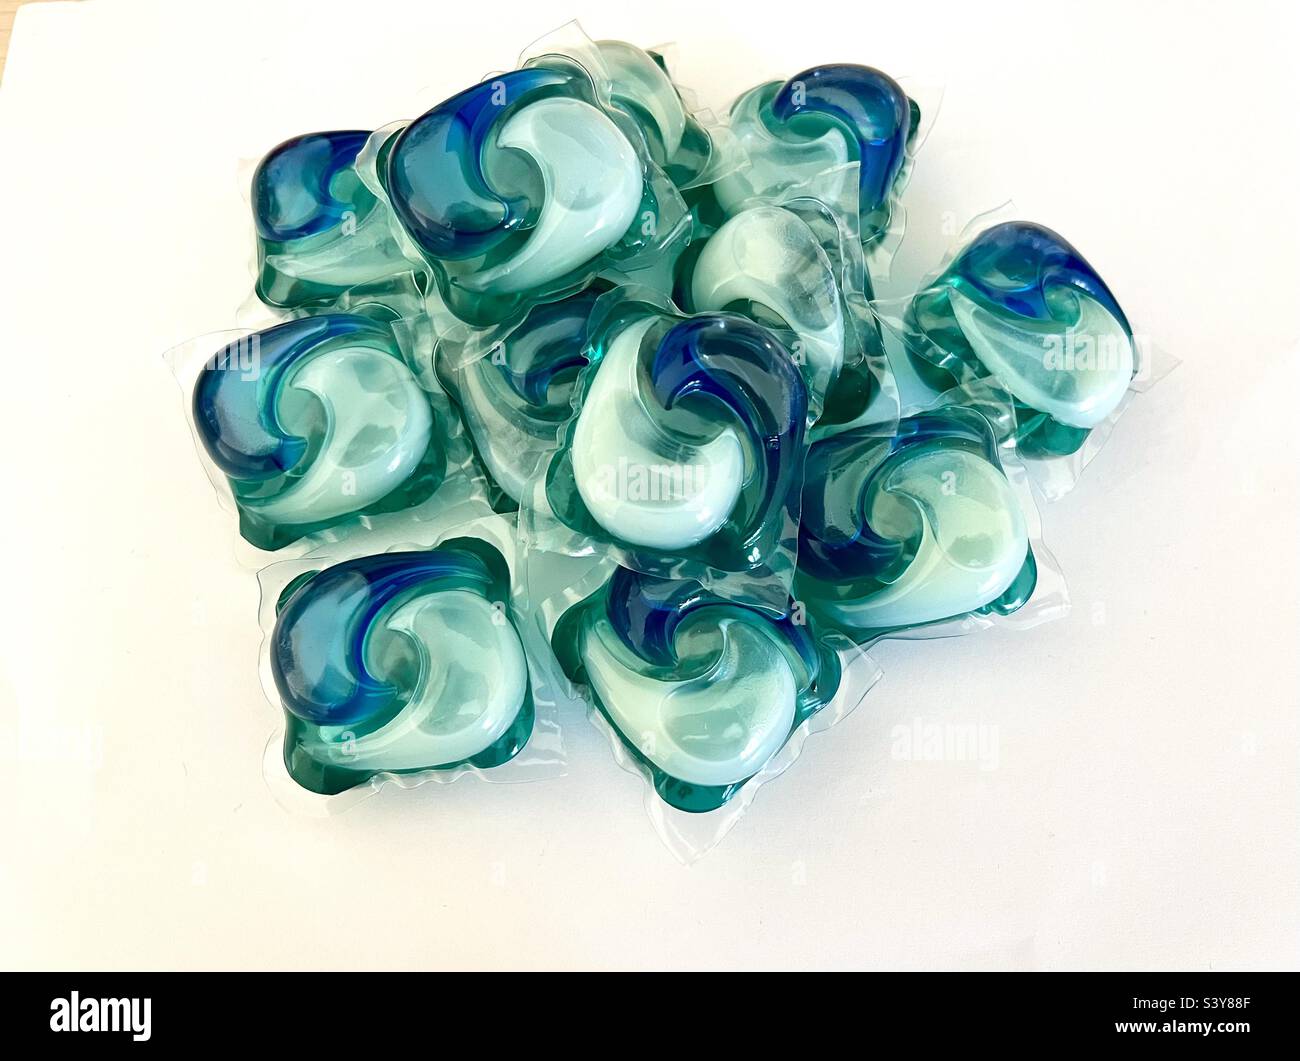 Fairy Platinum All in One dishwasher tablet in soap compartment of  dishwasher Stock Photo - Alamy